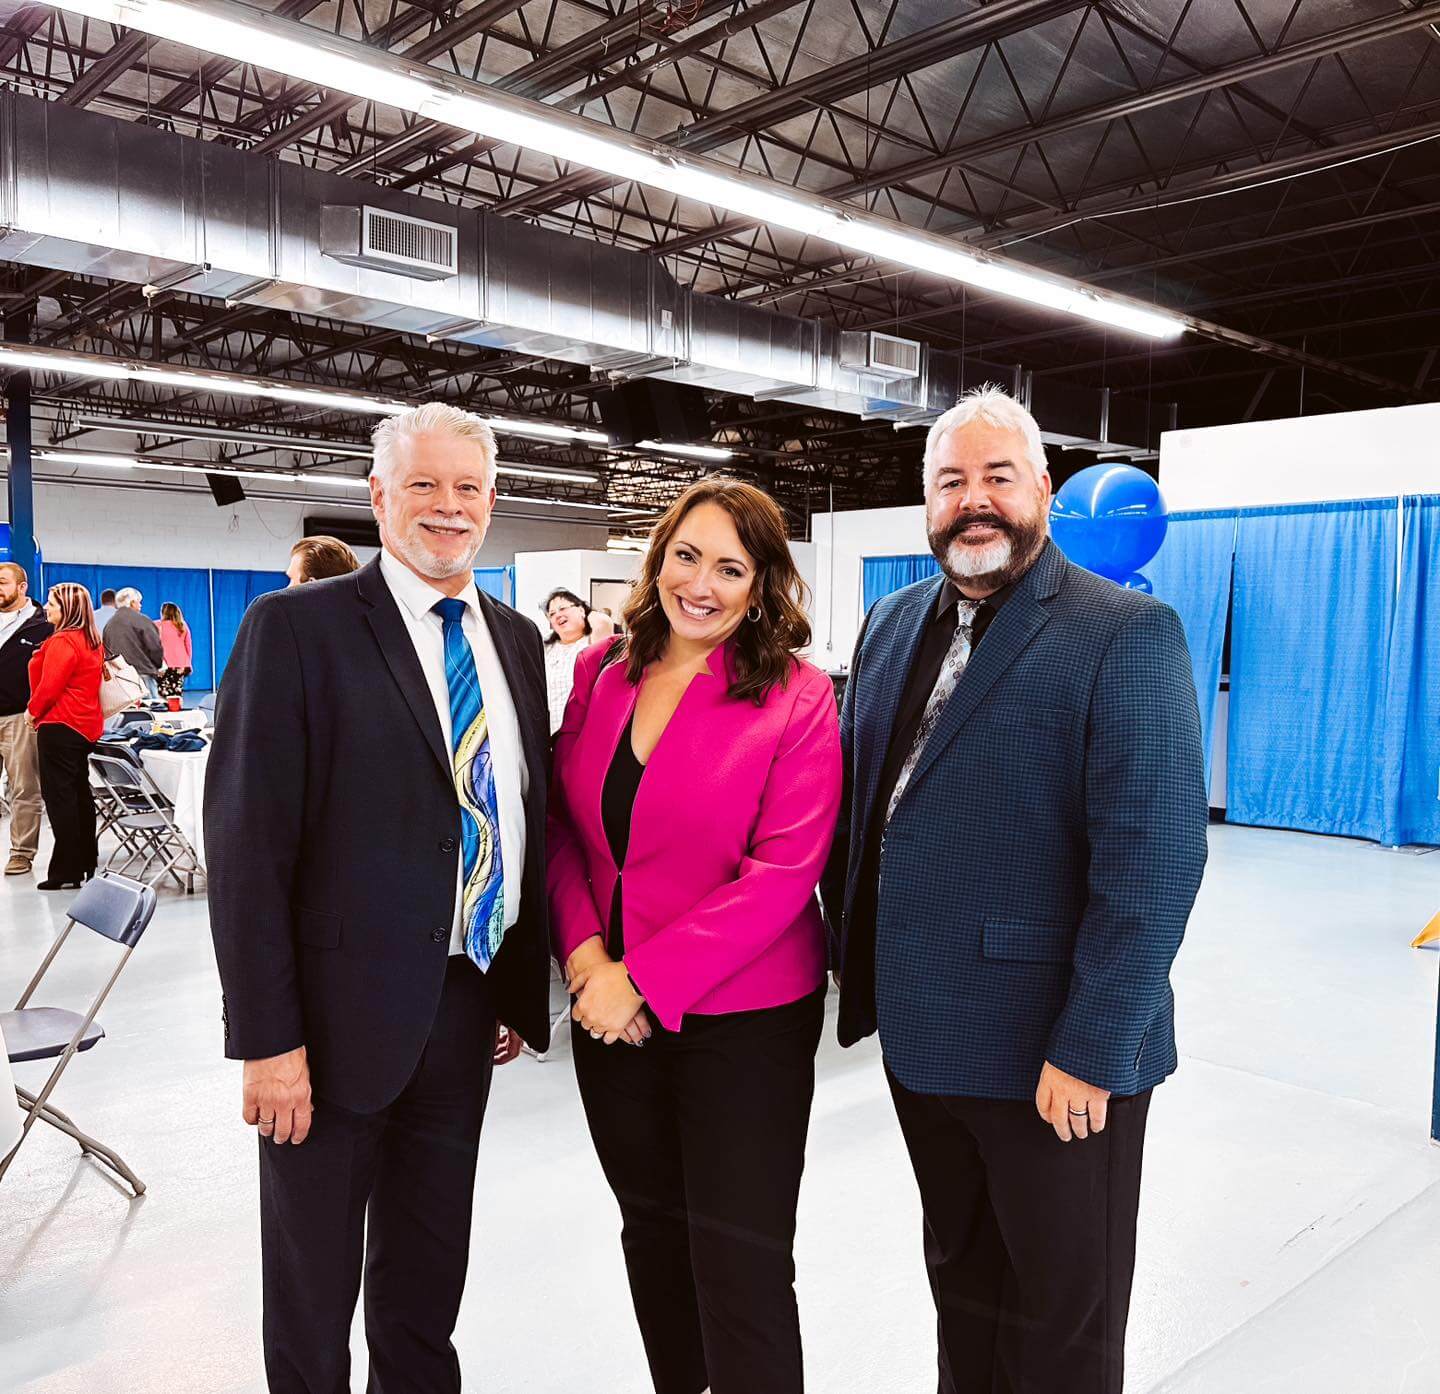 VP of Membership, Events and Education Mike Howard and Marketing Director Laurie Conway with Marshall County Chamber of Commerce President Scott Reager at Marshall County's Annual Dinner in October 2022